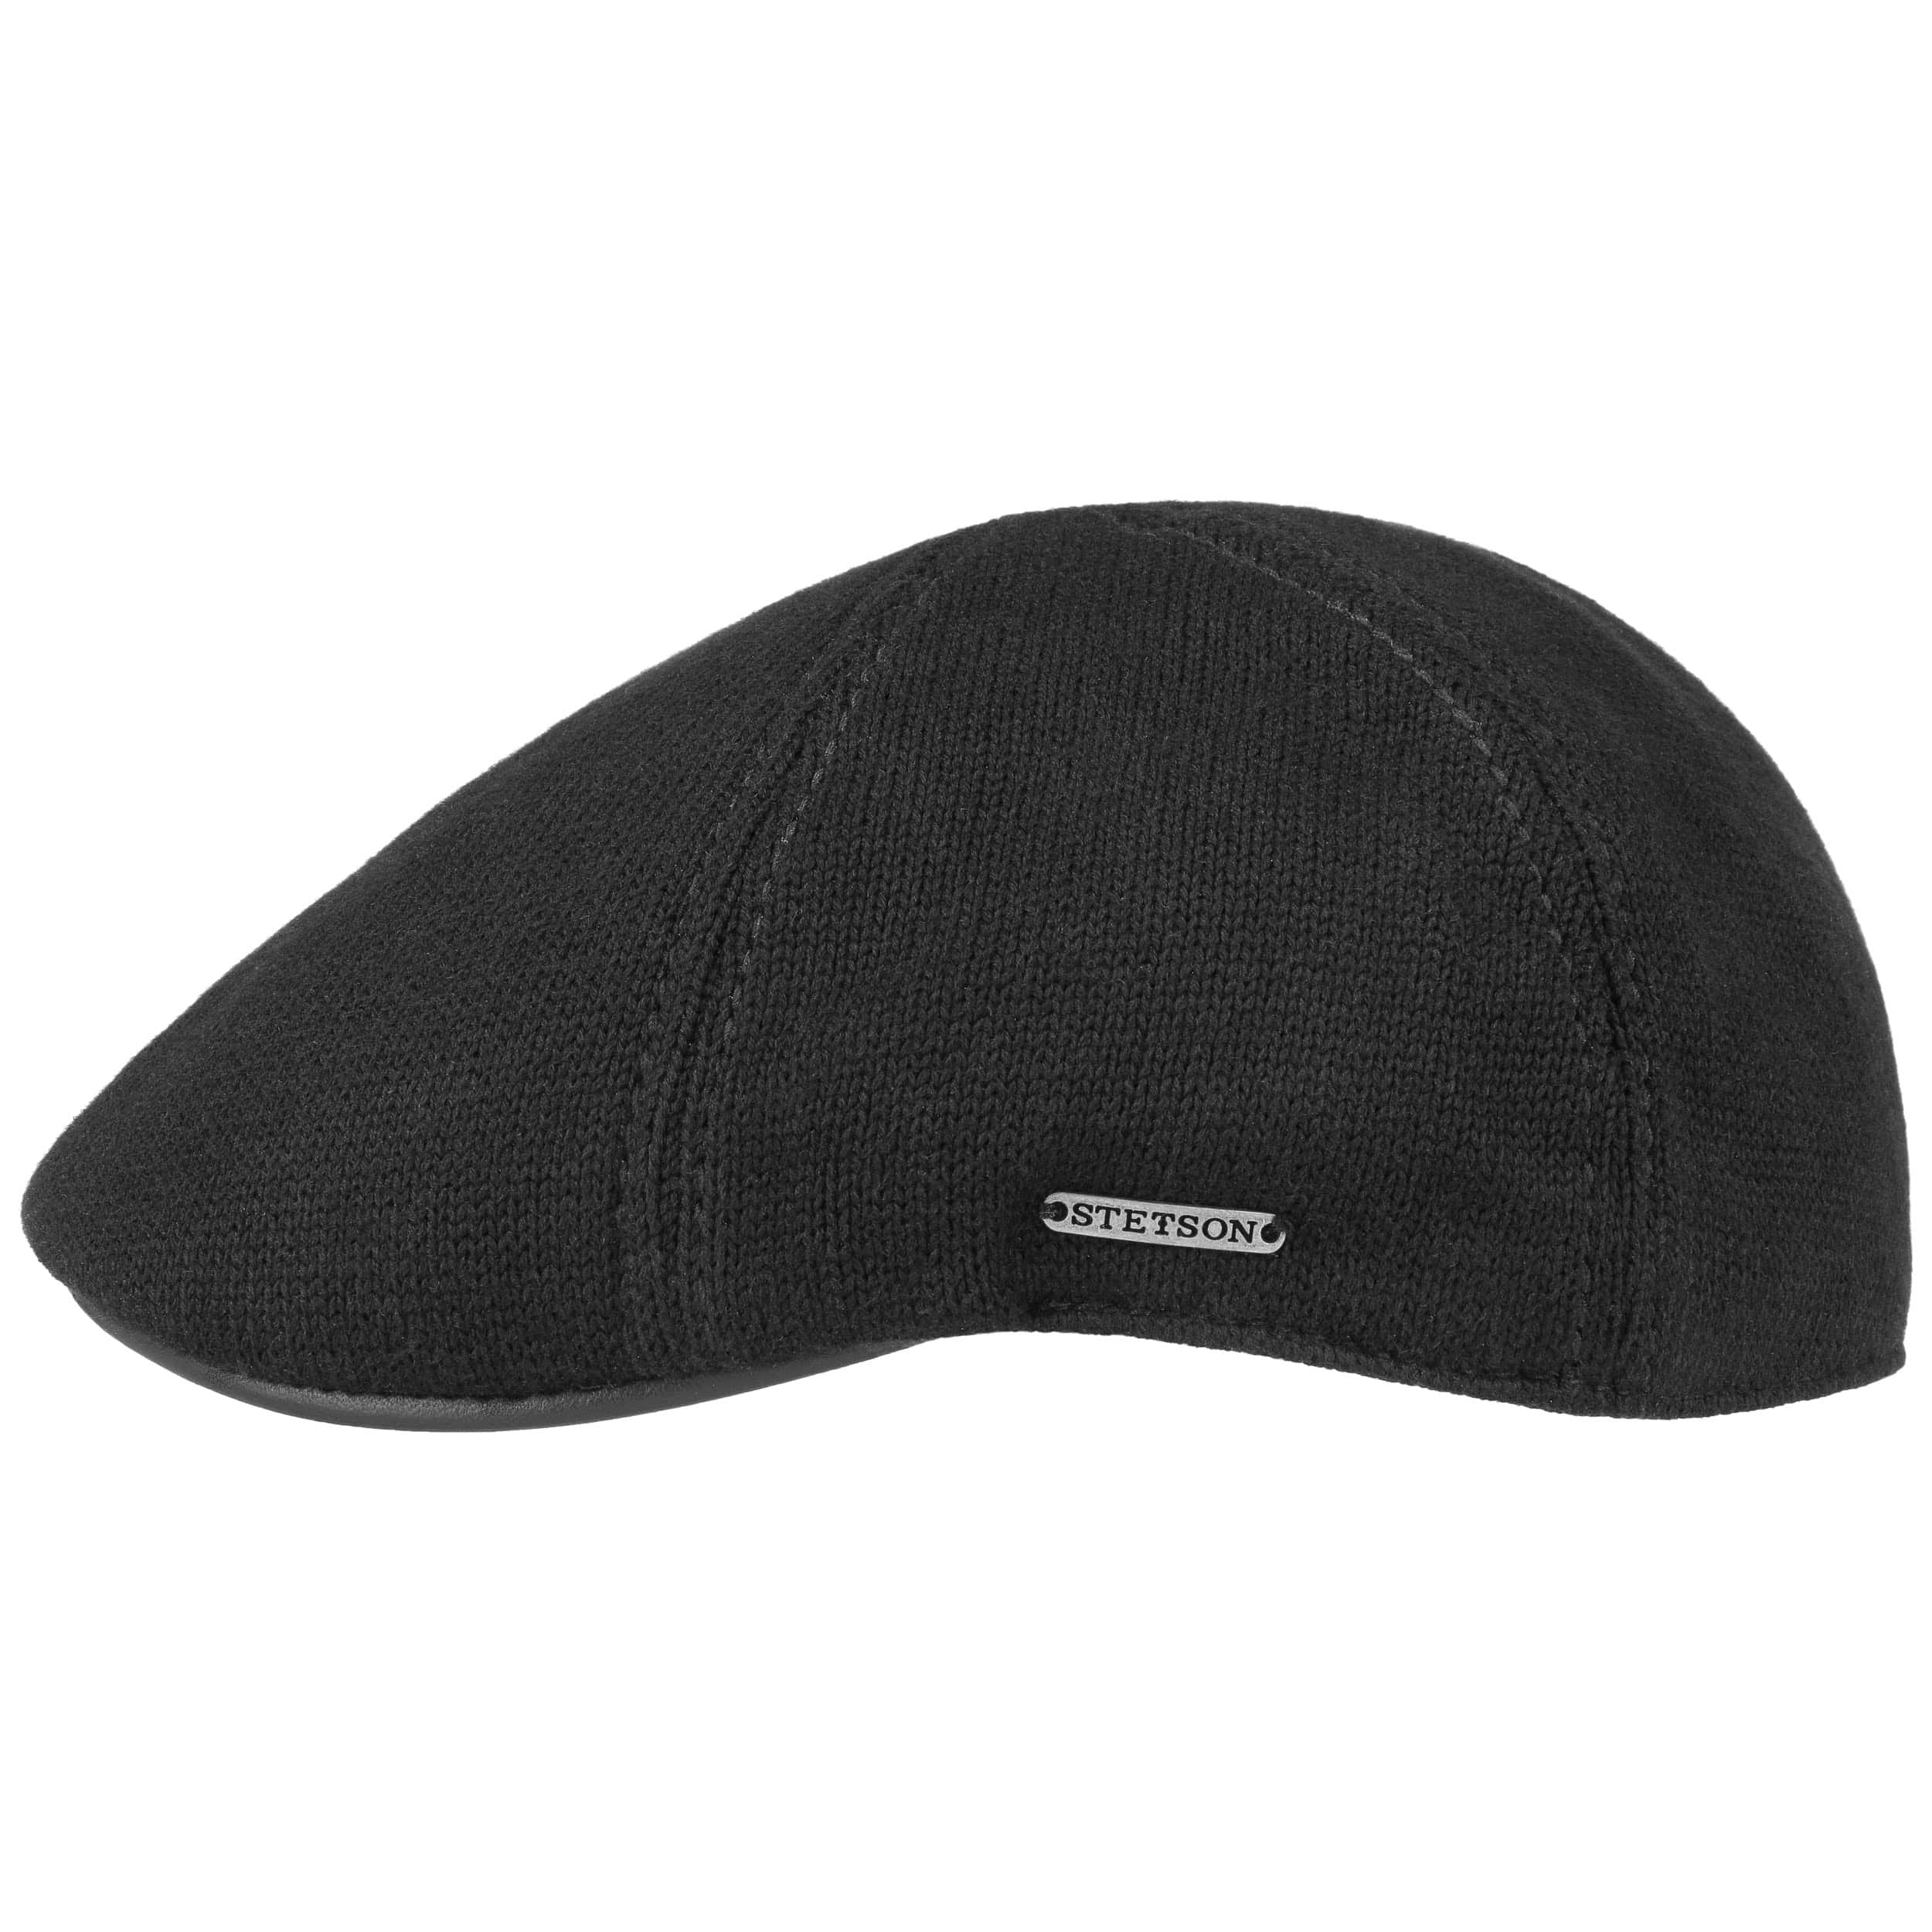 Cap by Stetson - €